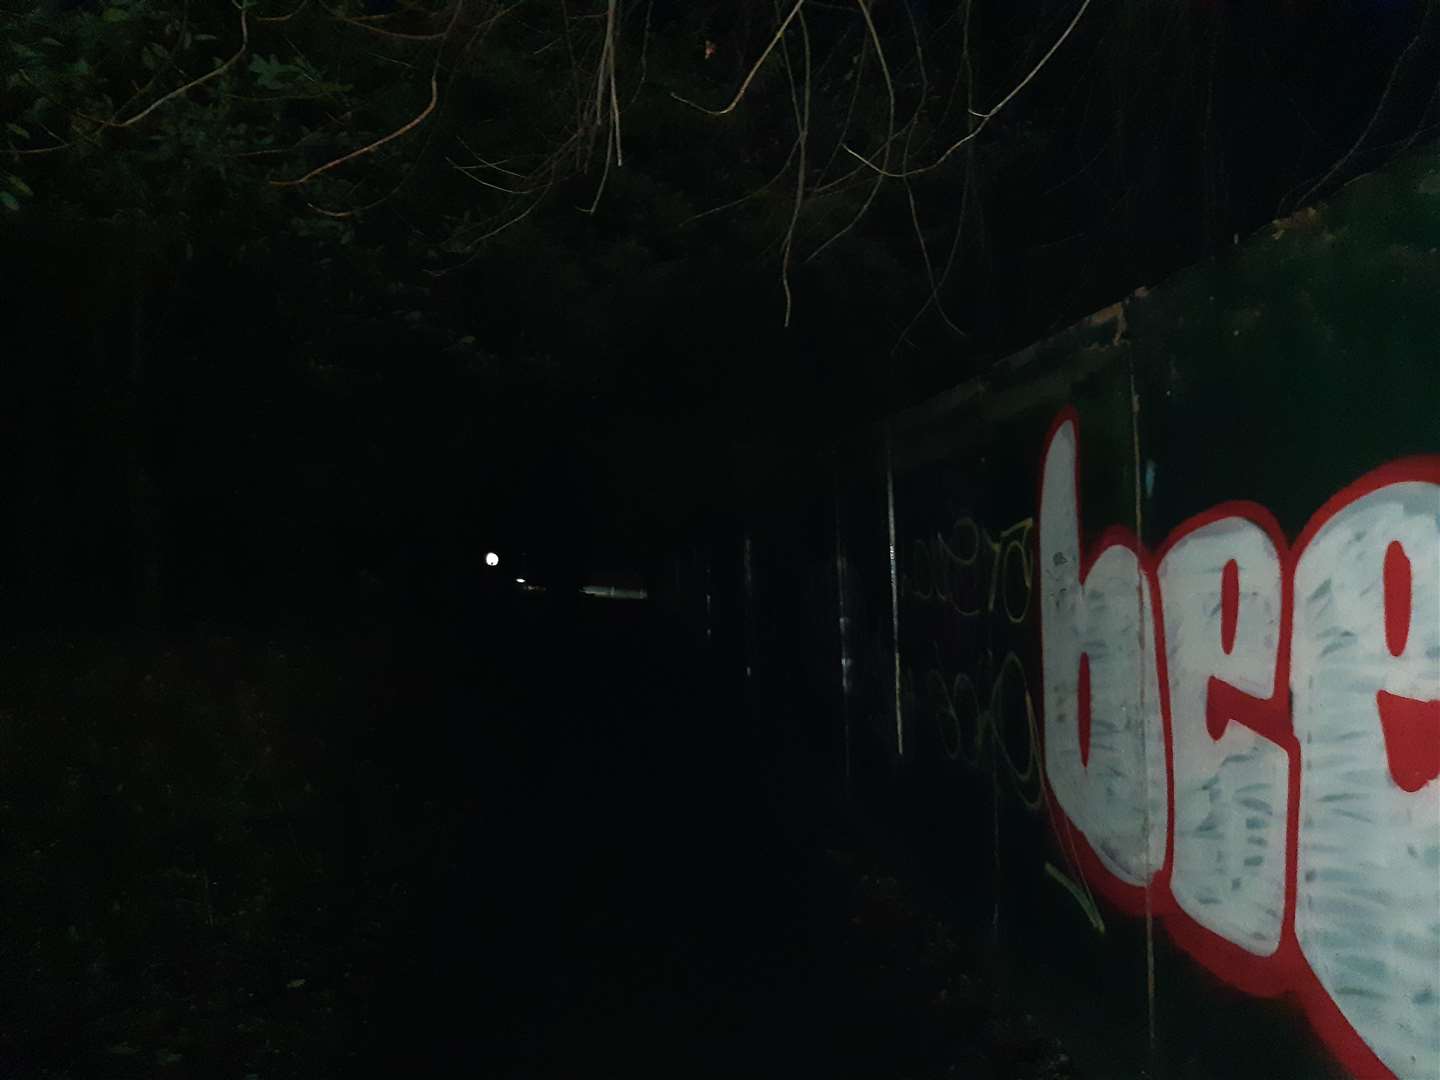 Only the graffiti shows up at night